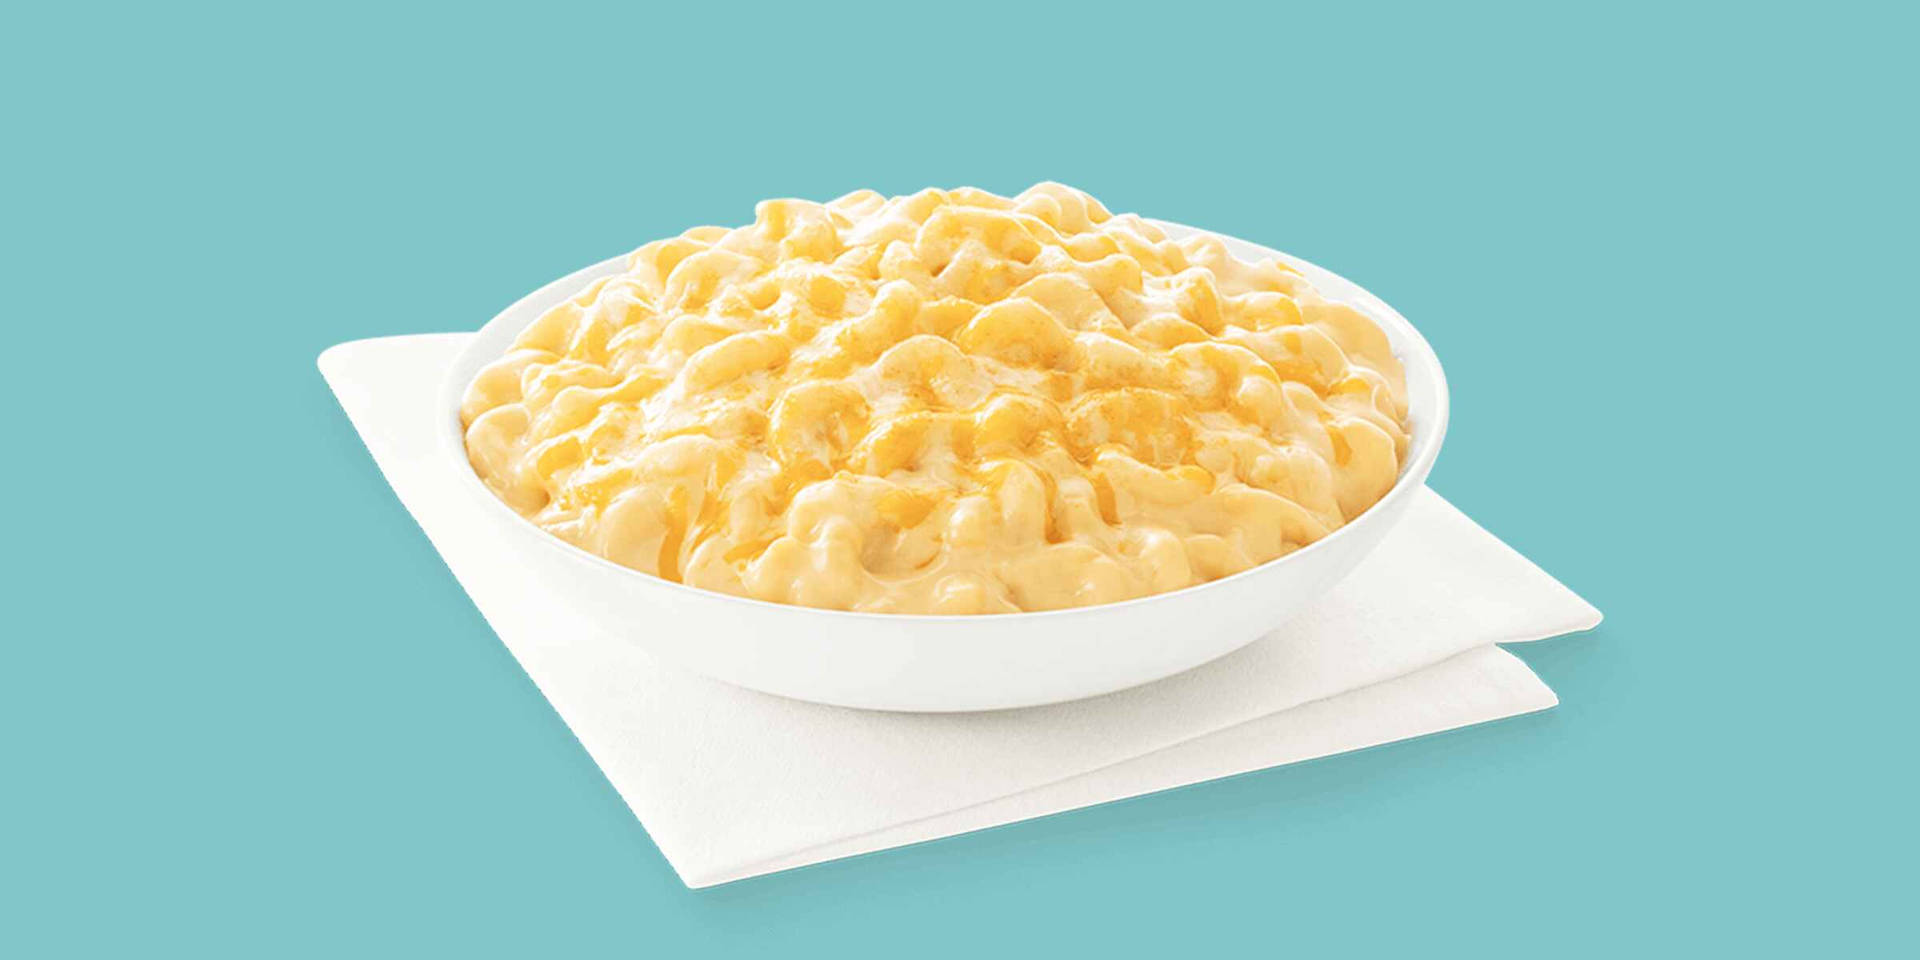 Mac And Cheese On Blue Background Wallpaper